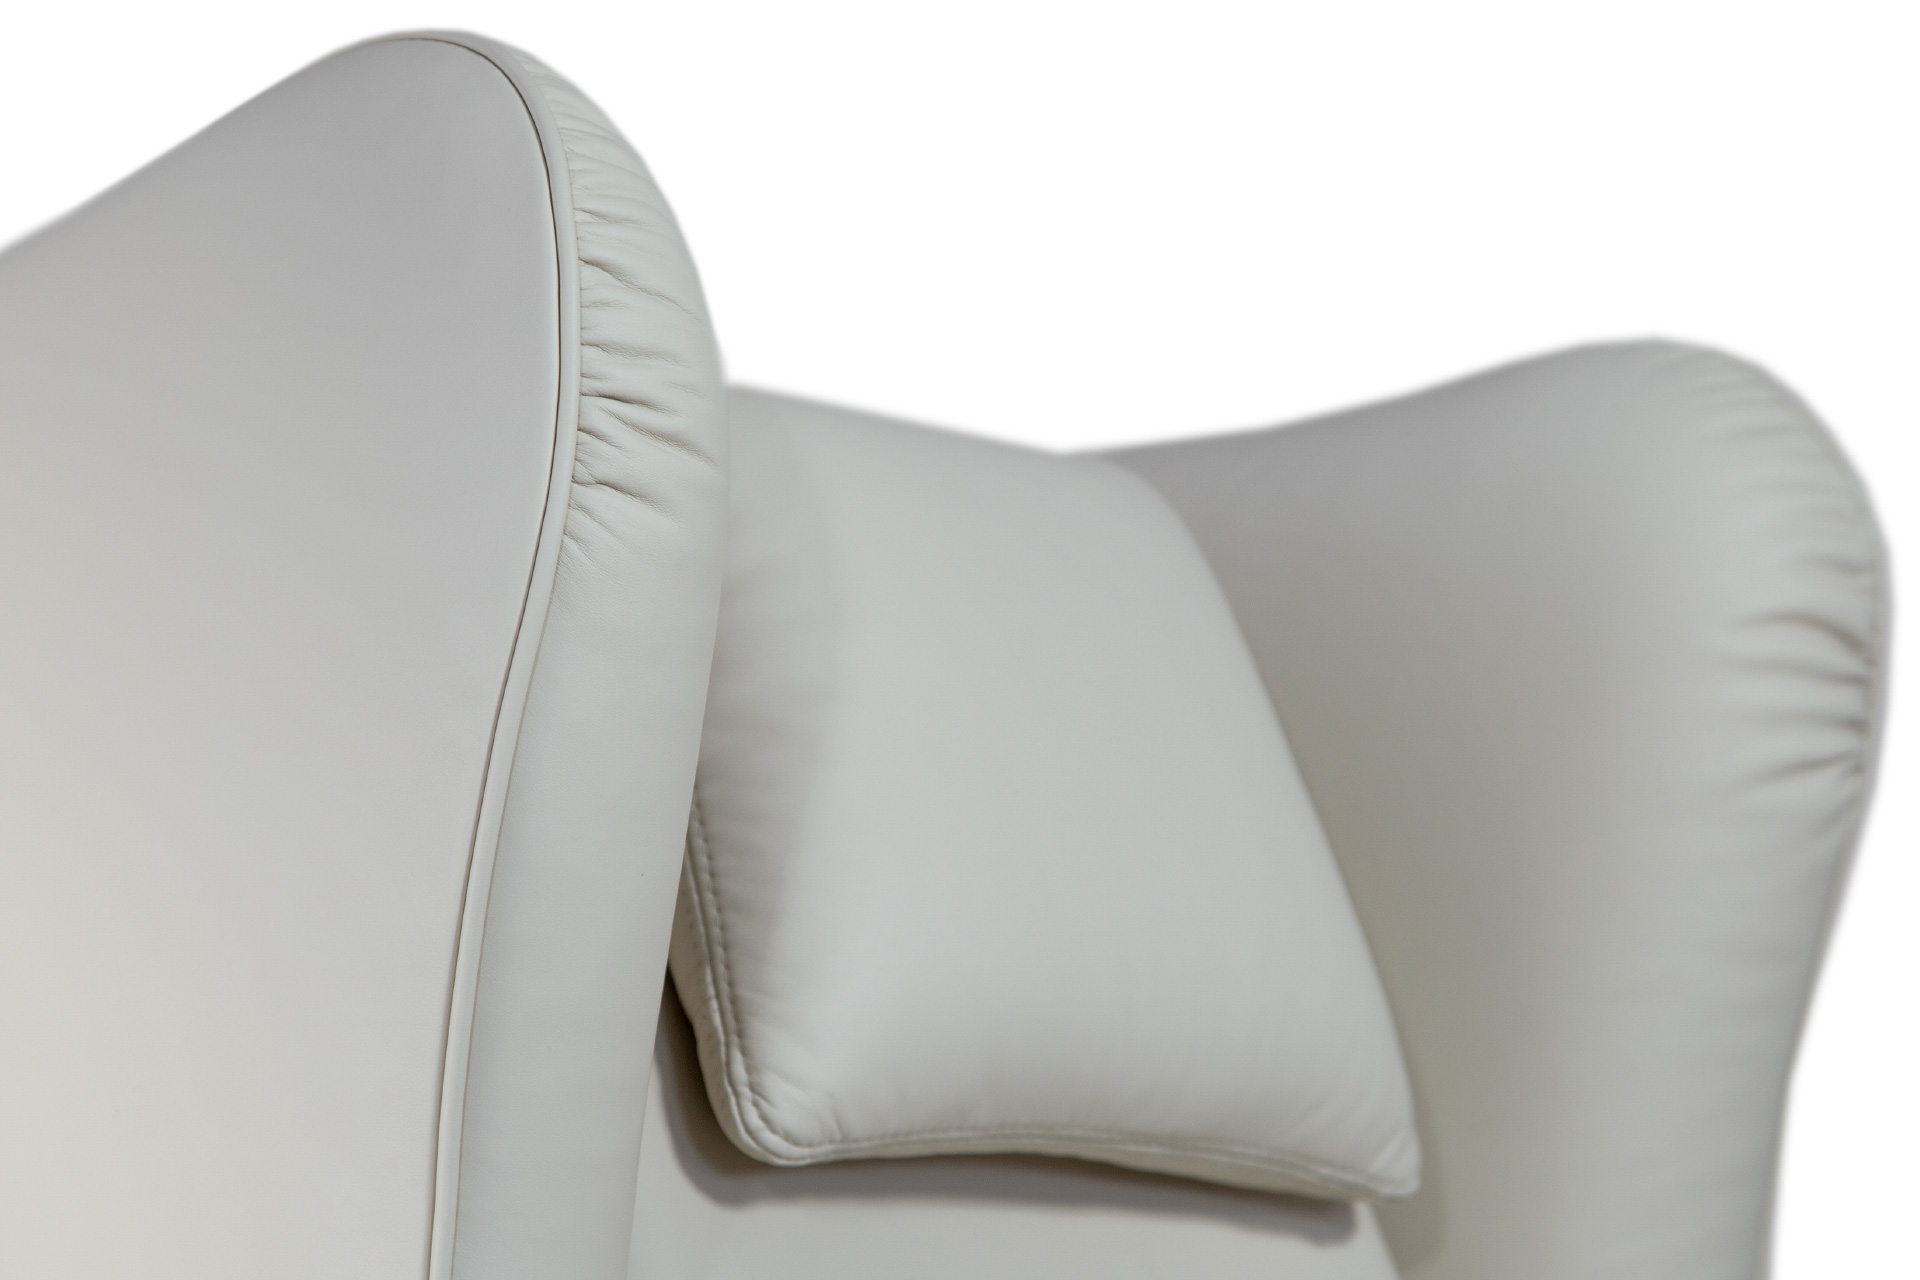 ANGEL armchair is perfect in every aspect